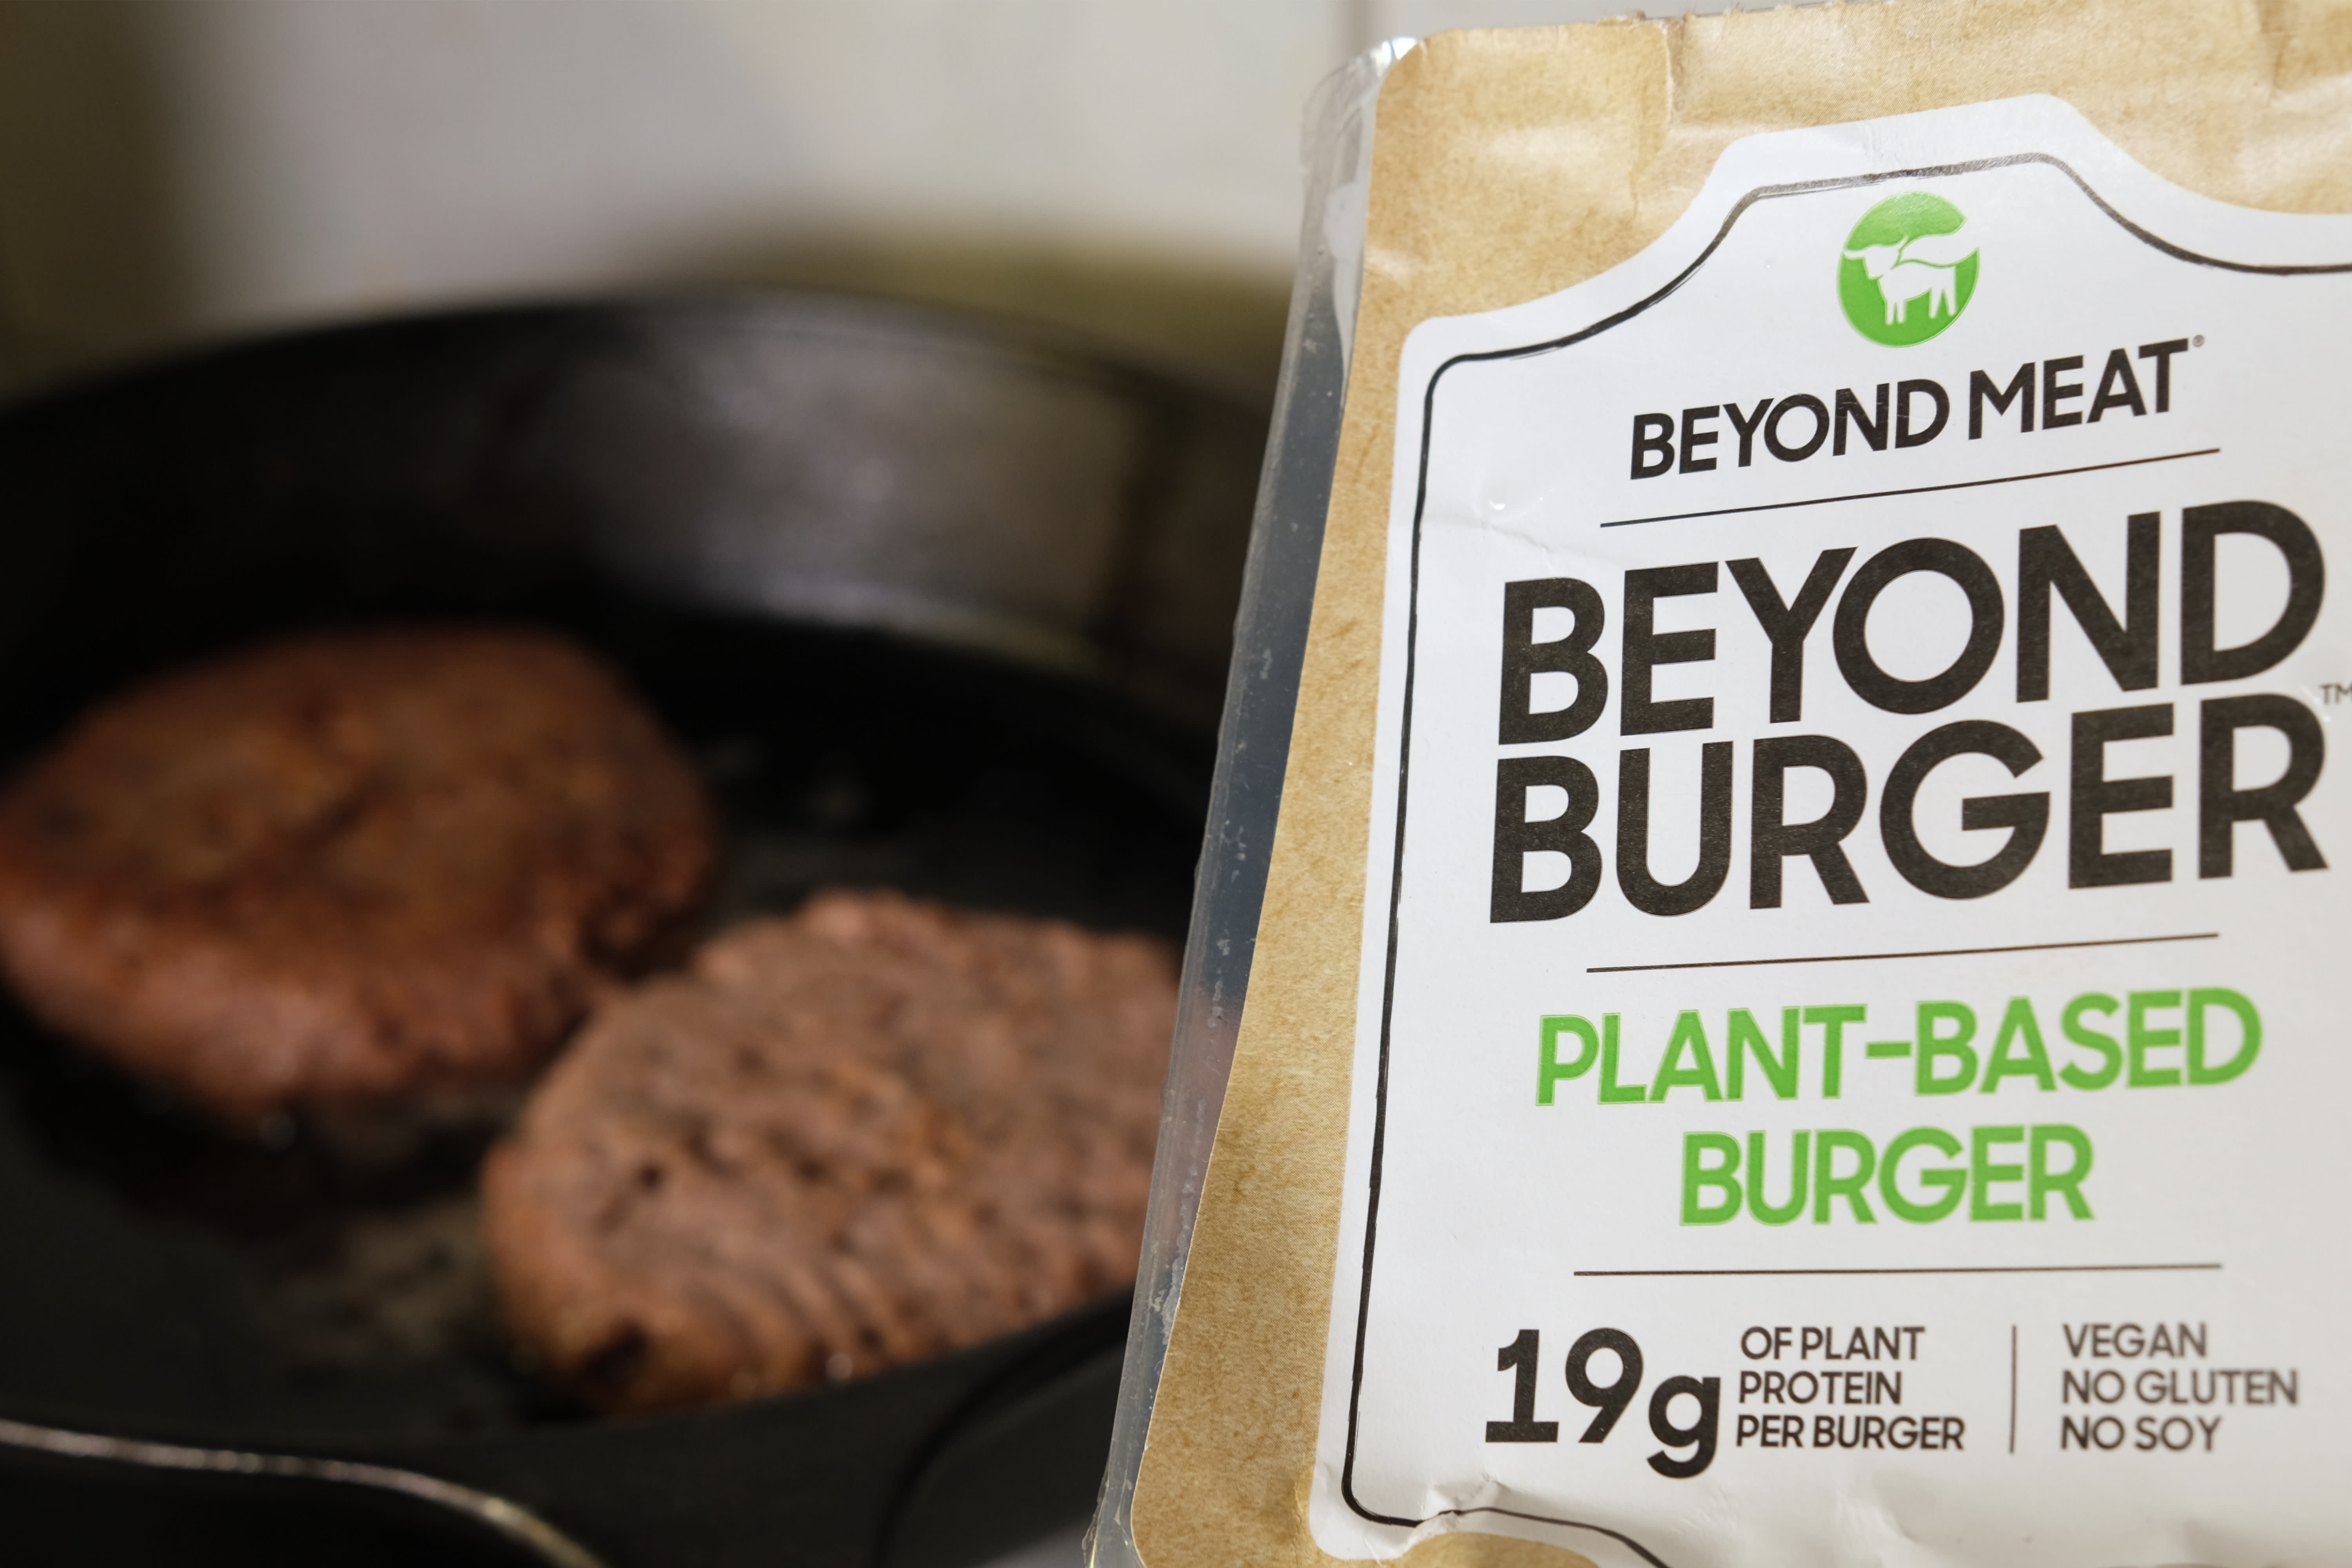 Beyond meat and PepsiCo, a business is being formed to produce herbal products